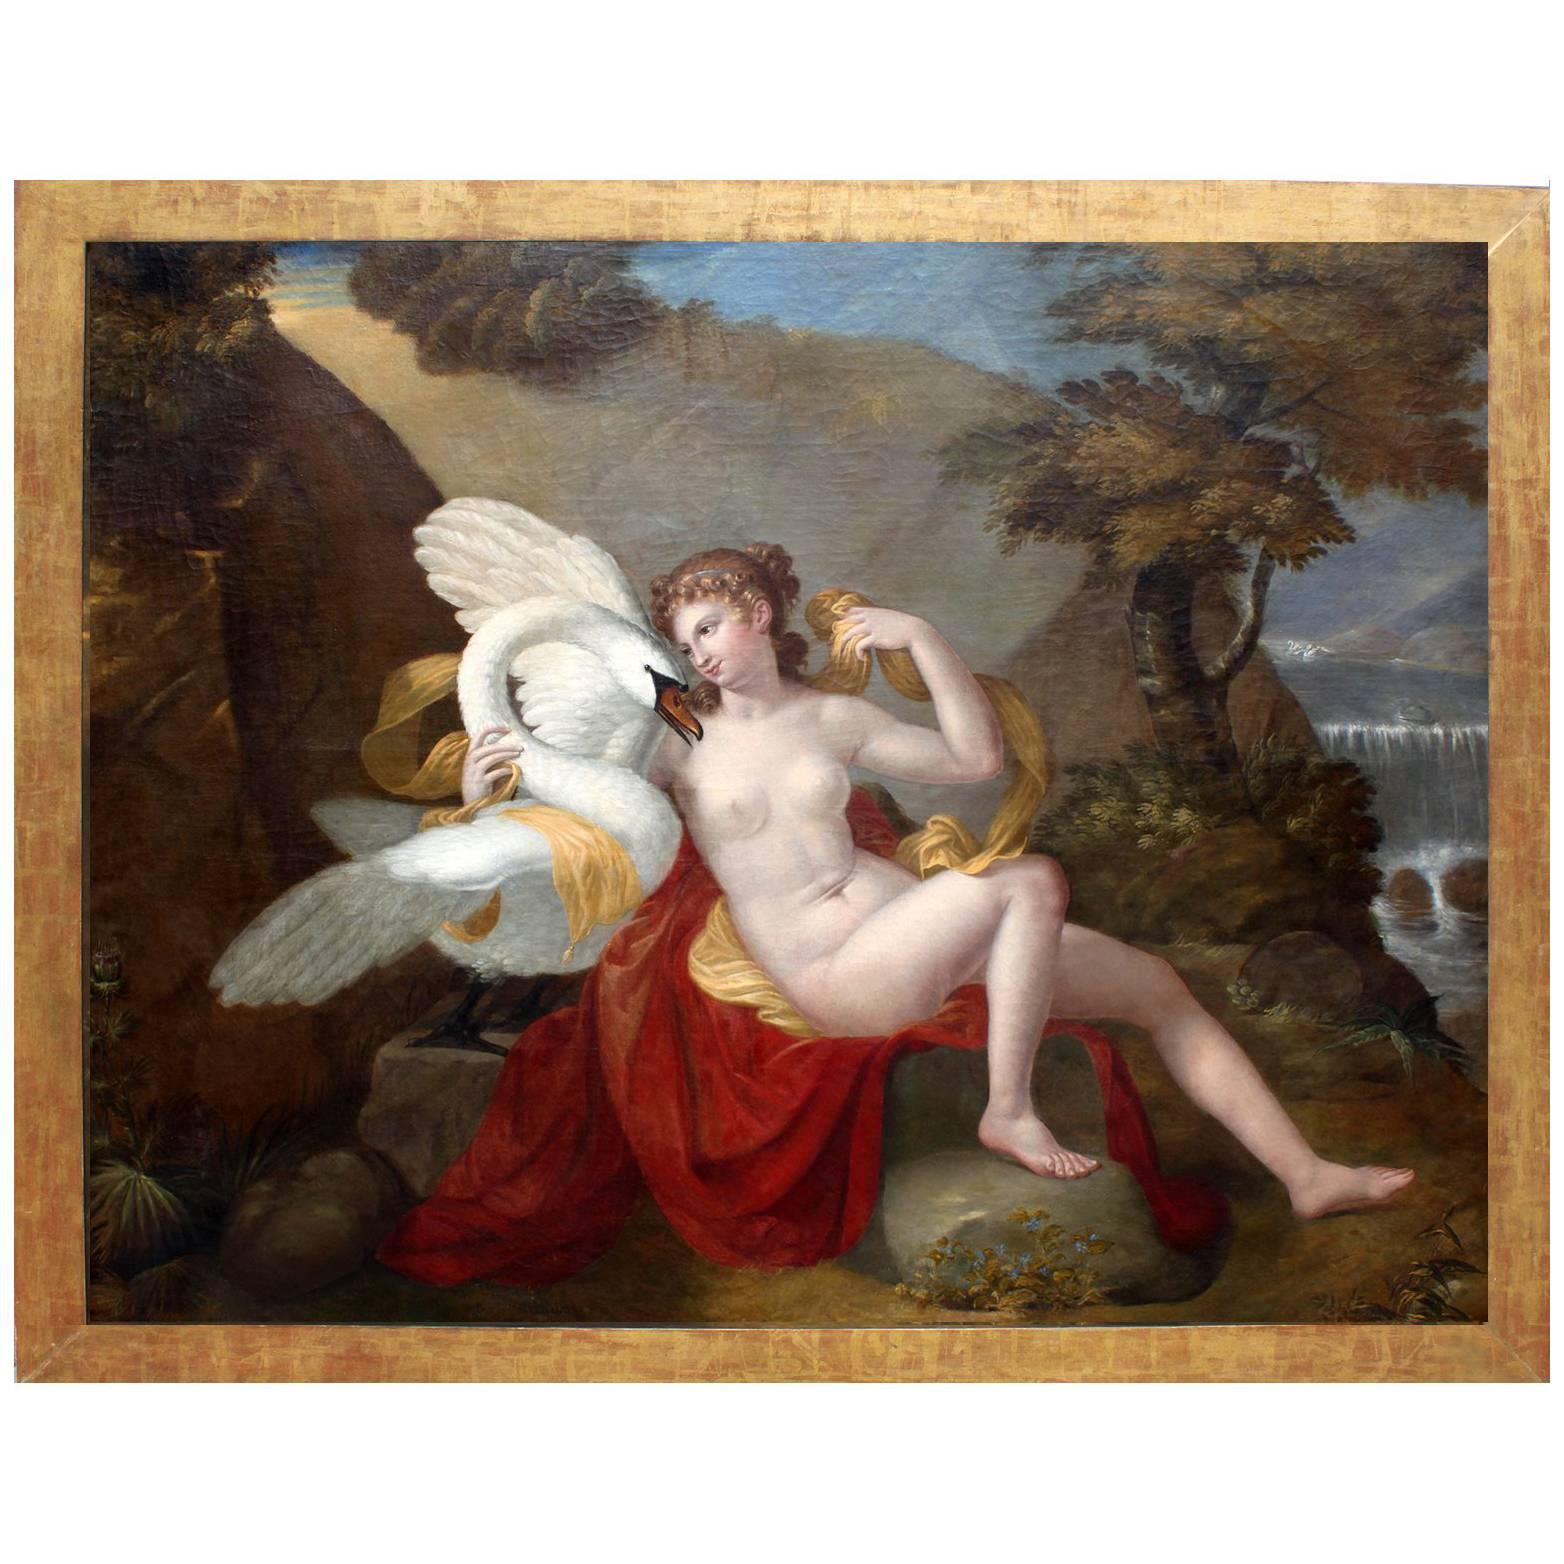 French 19th Century Old Master School Oil on Canvas Titled "Leda and The Swan"